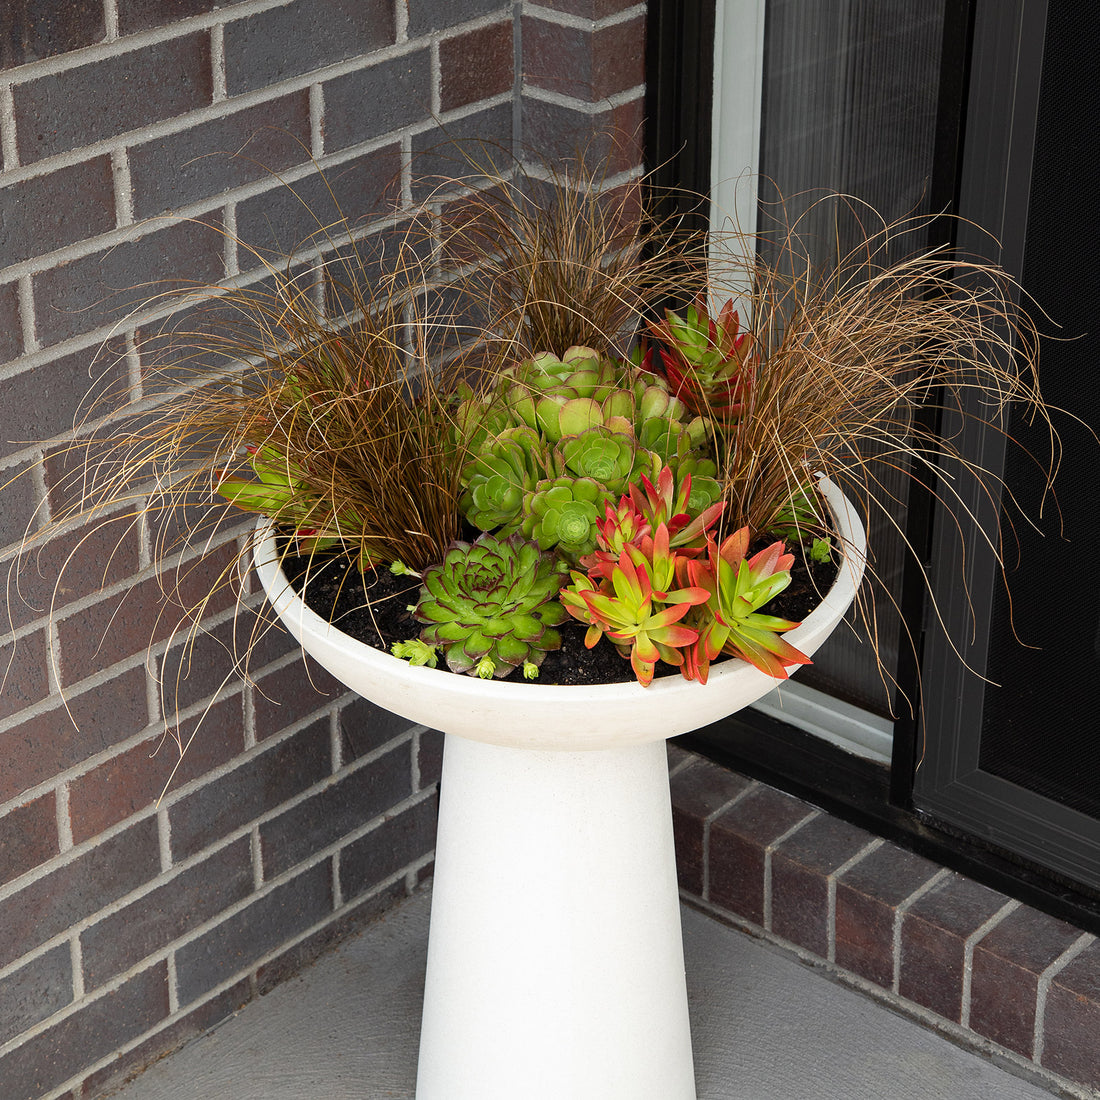 Turn your bird bath into a stunning potted feature